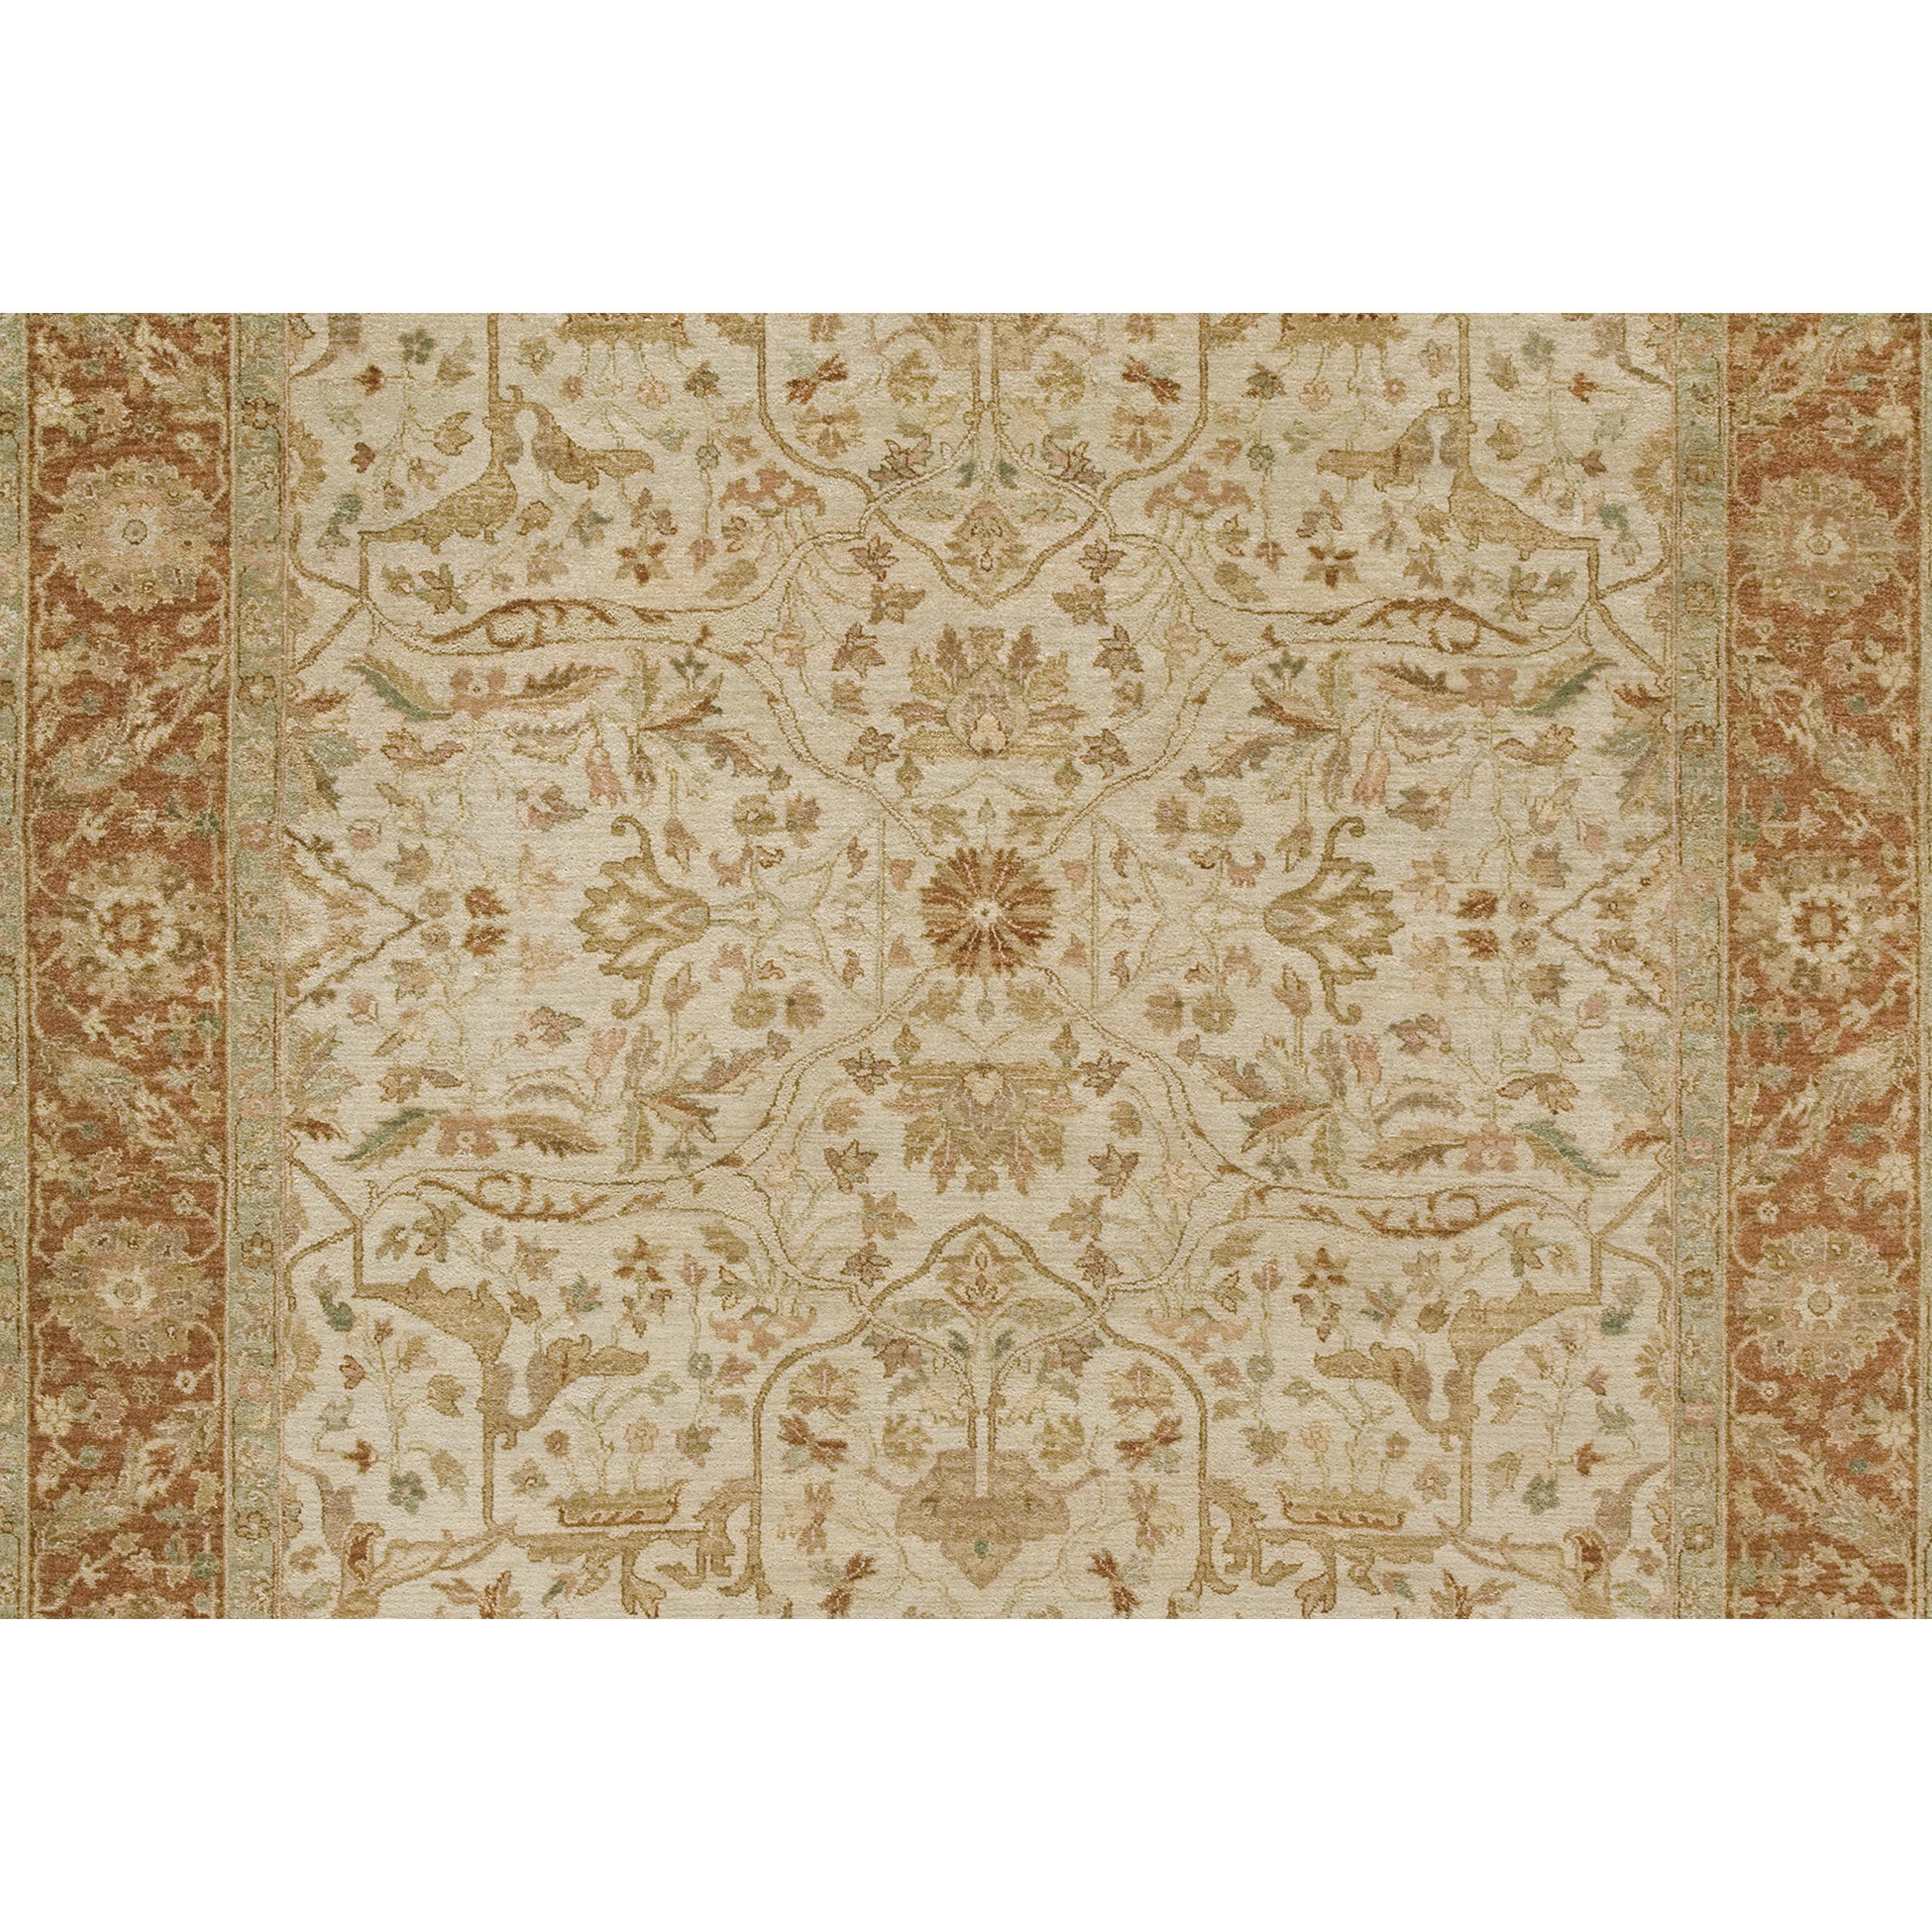 Indian Luxury Traditional Hand-Knotted Ivory/ Bronze 14x28 14x28 Rug For Sale